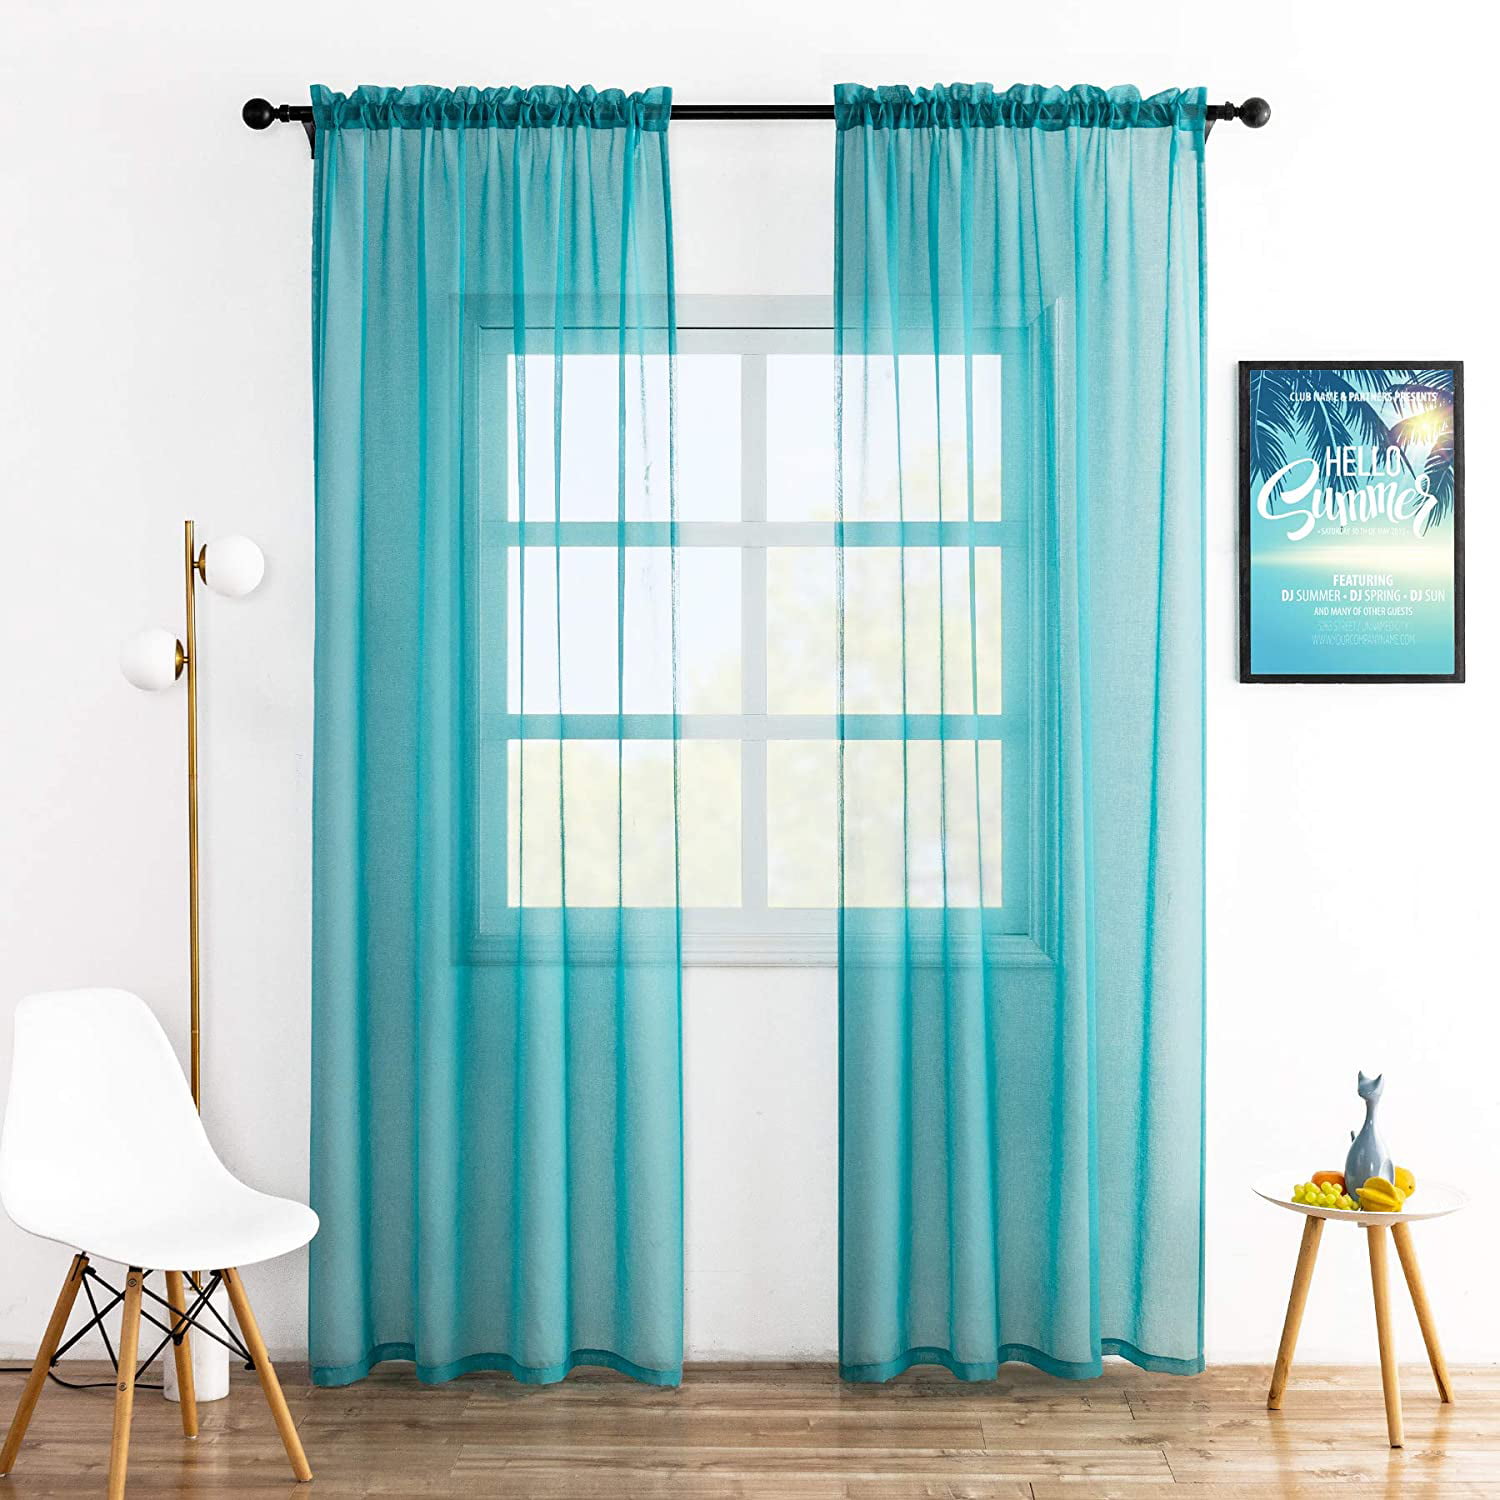 Linen Textured Sheer Curtains for Bedroom Curtain 63 inches Long Rod Pocket Wind 